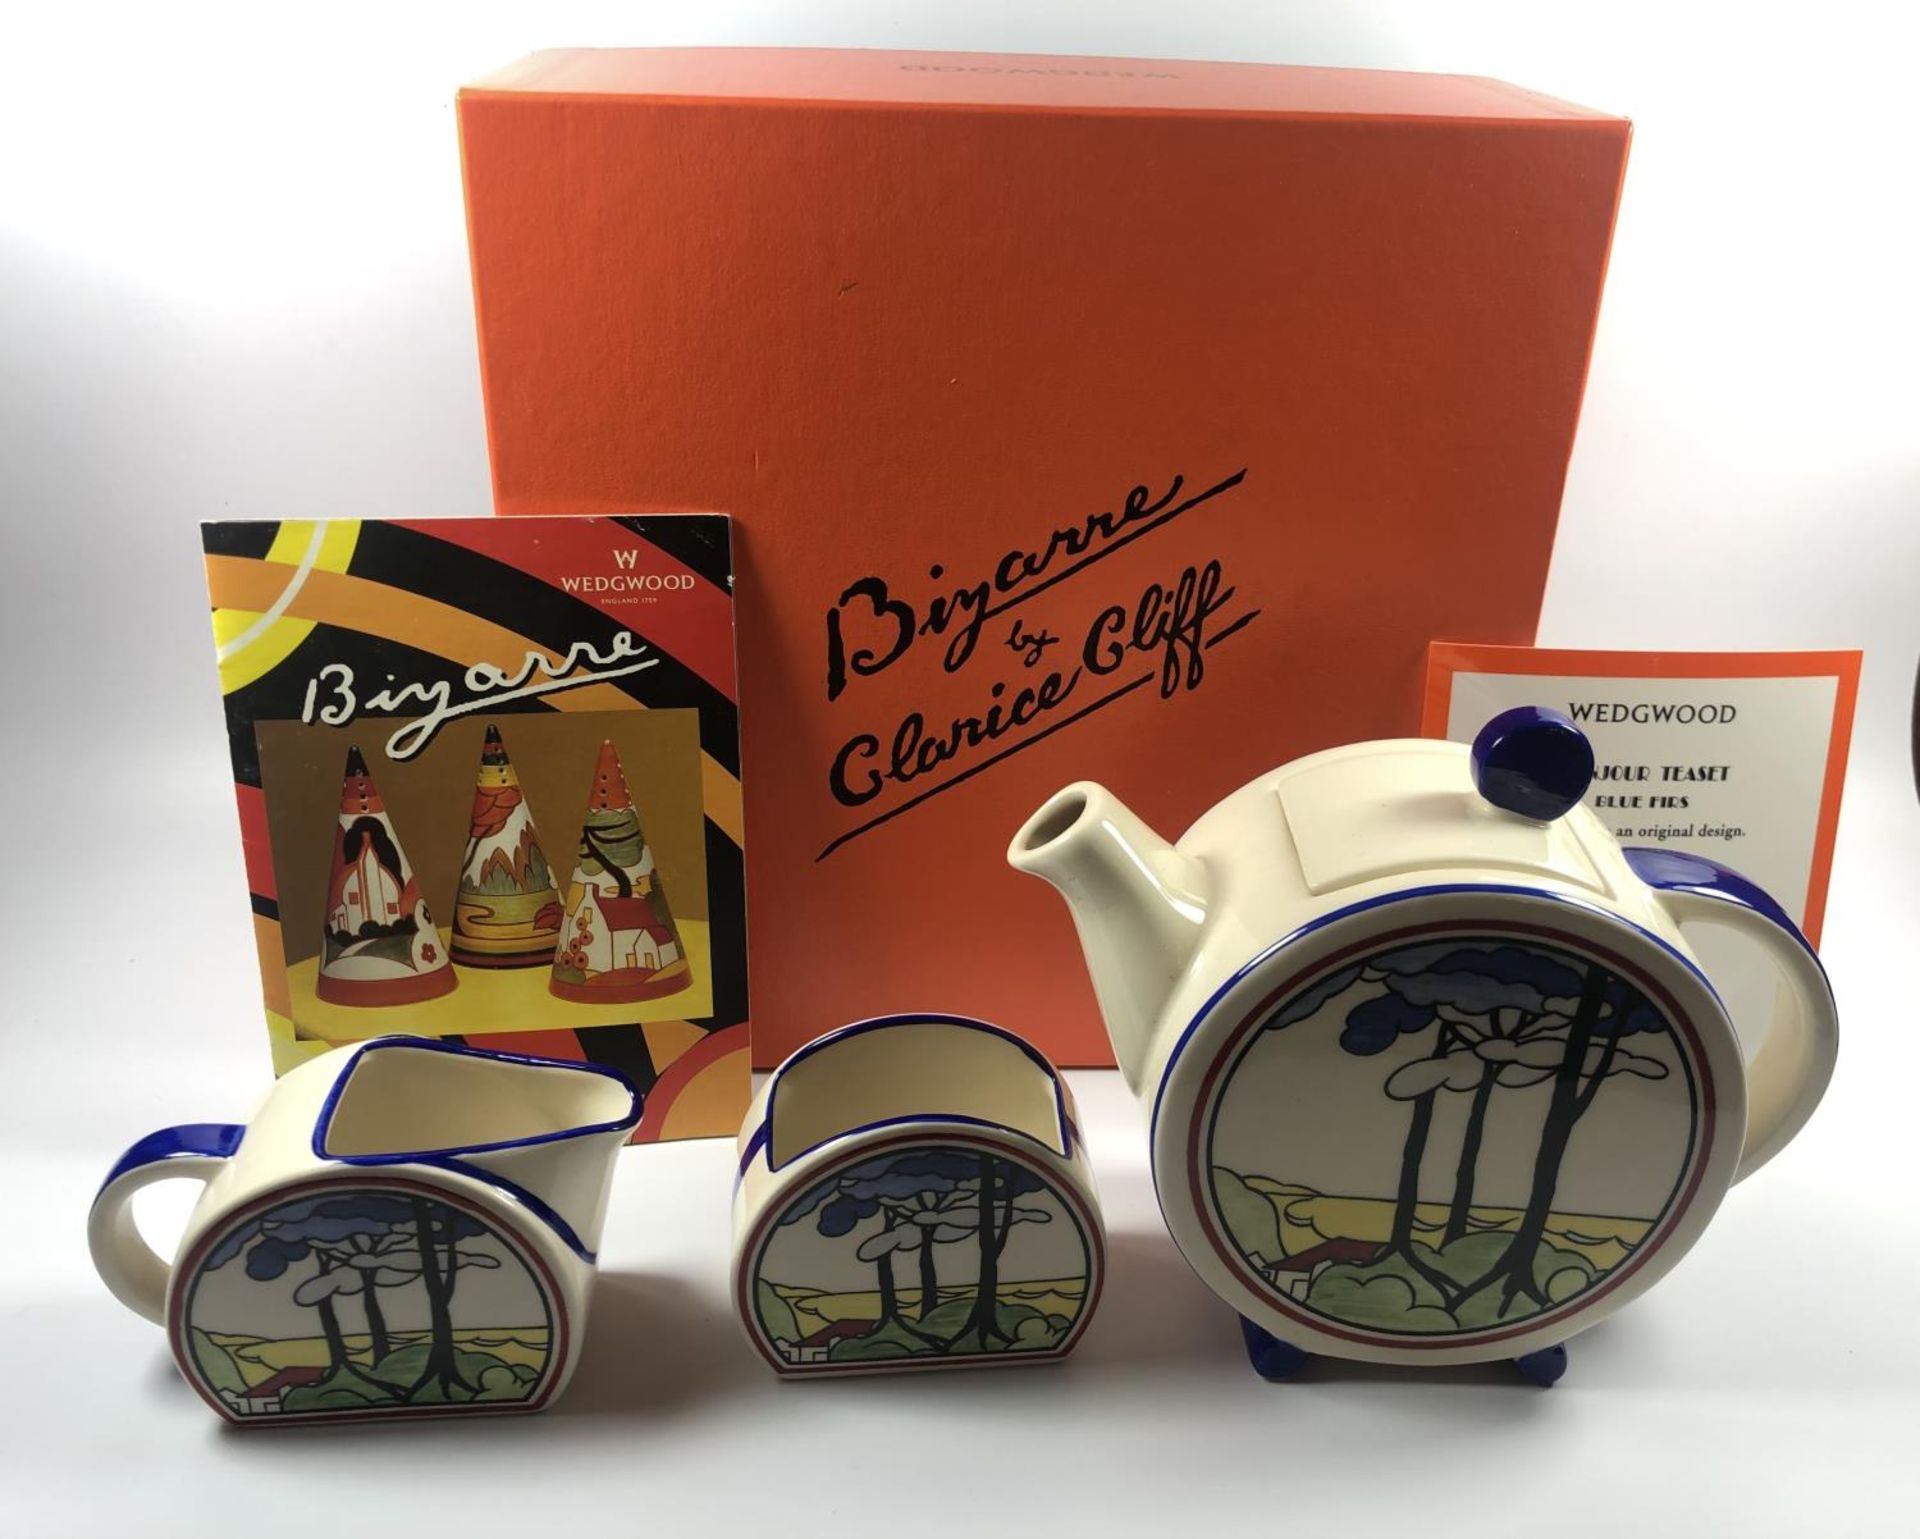 A BOXED WEDGWOOD 'CLARICE CLIFF' COLLECTION BLUE FIRS TEA FOR ONE SET, WITH CERTIFICATE